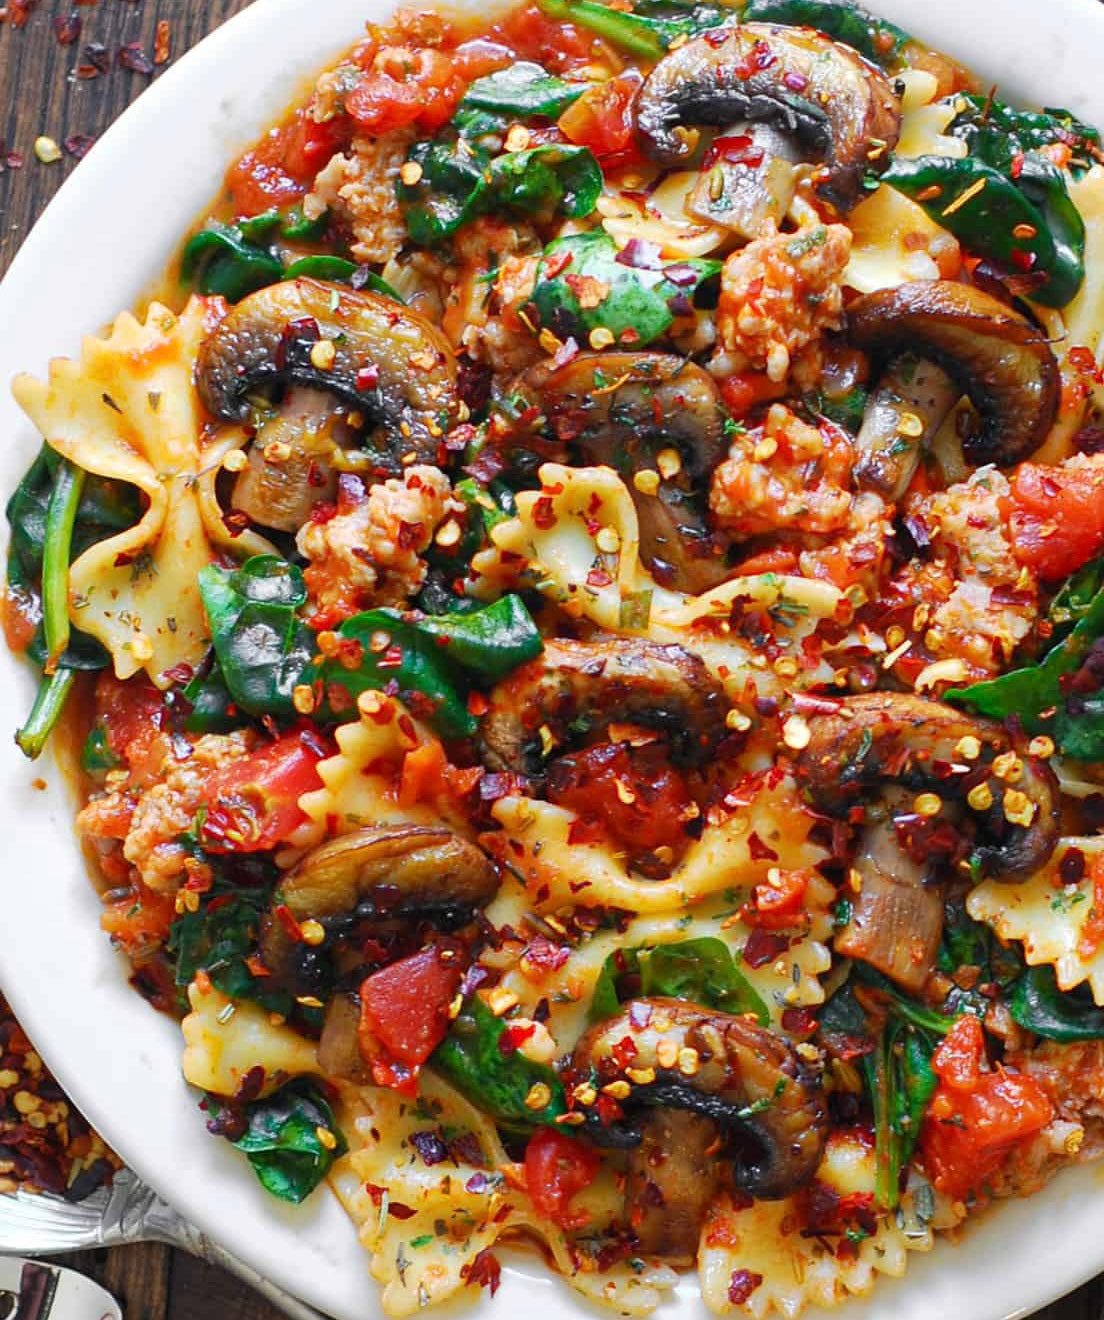 Rosé Farfalle with Ground Chicken, Mushrooms and Spinach